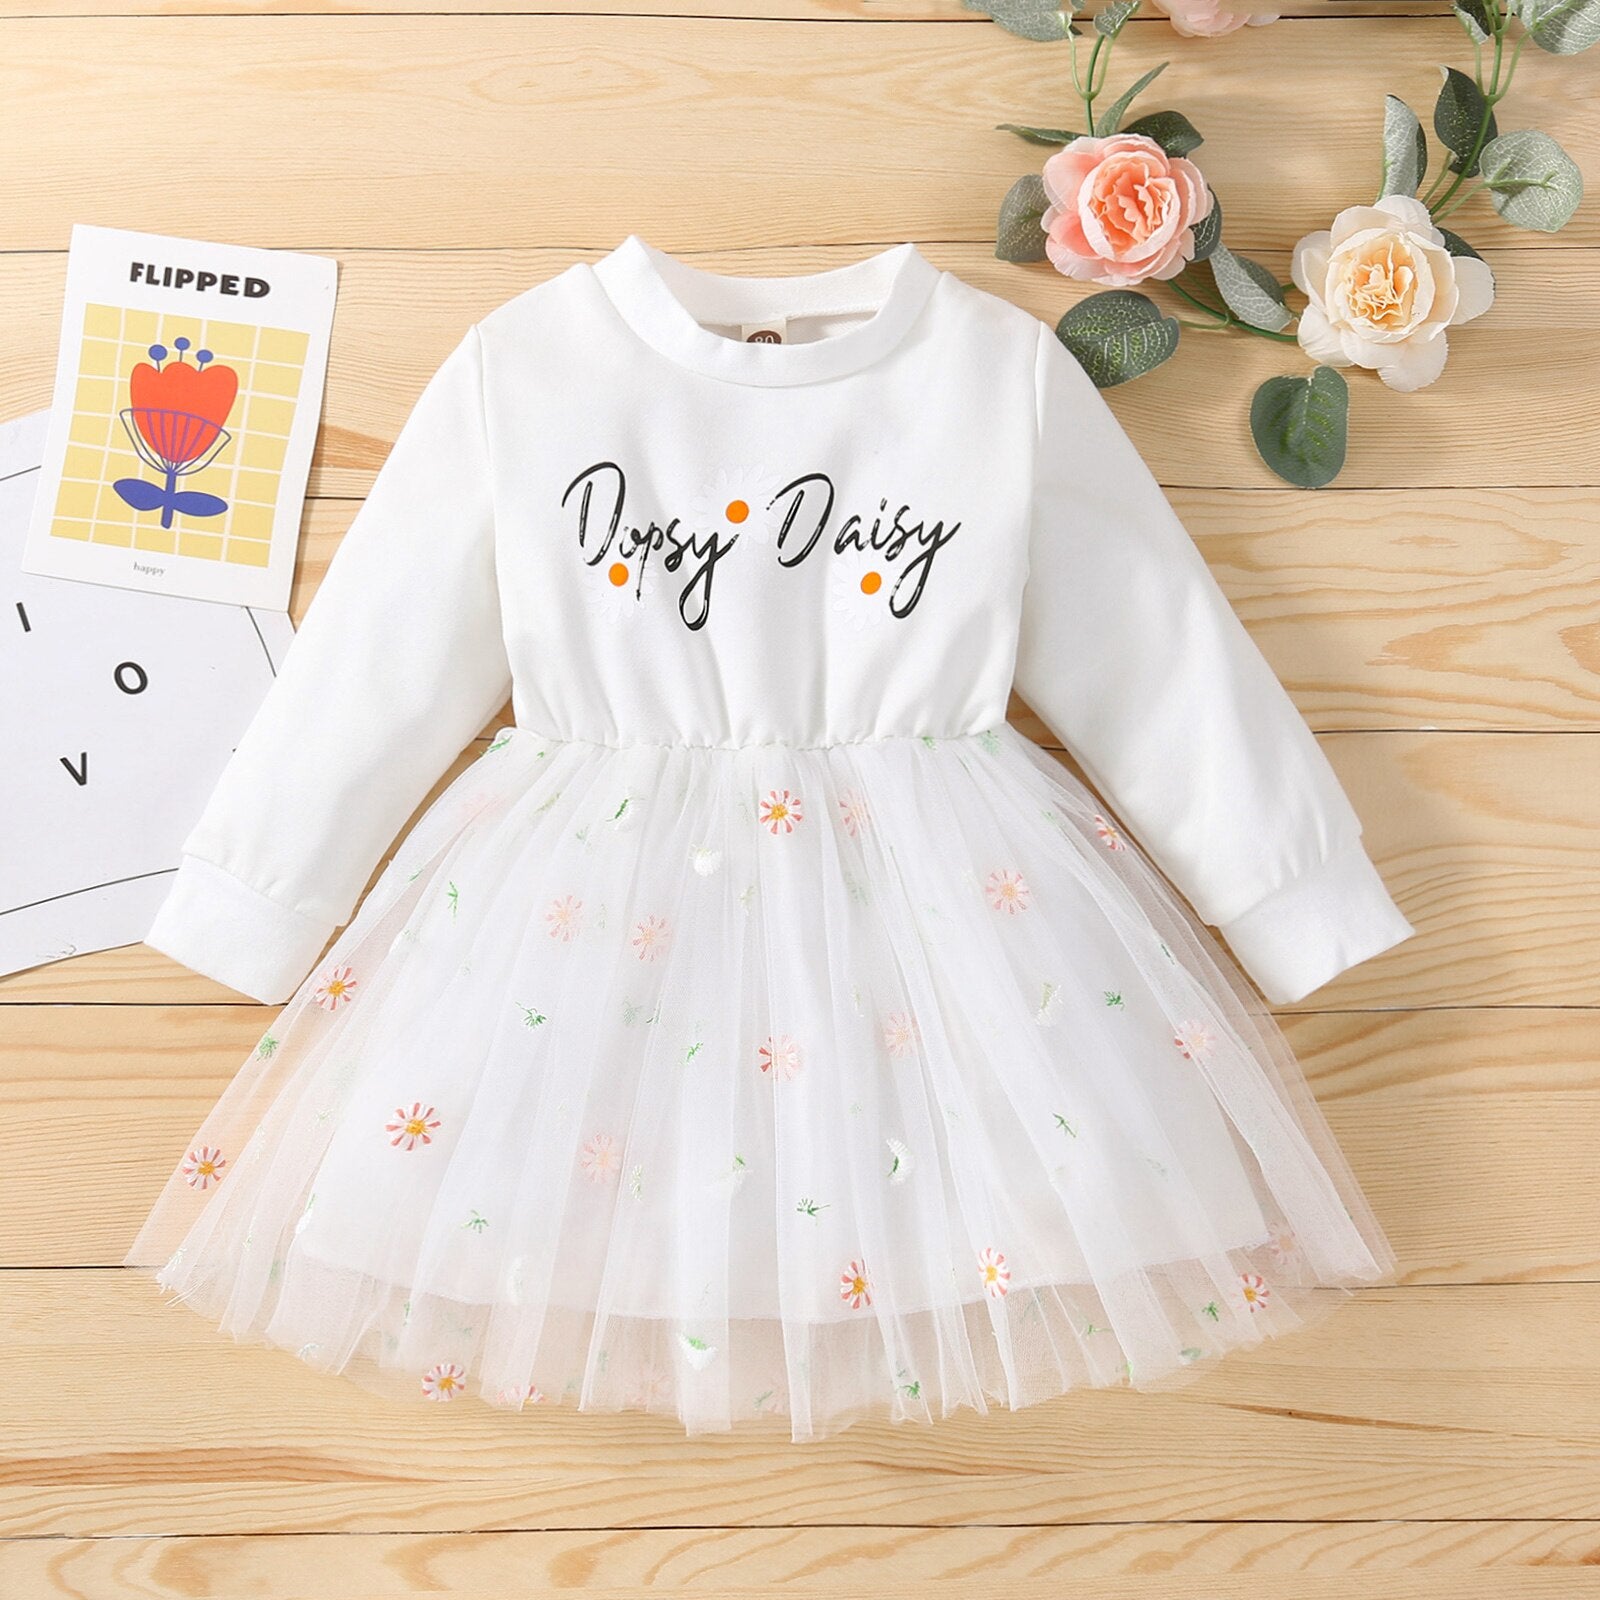 Adorable Infant Baby Girl Sweet Dress for Autumn